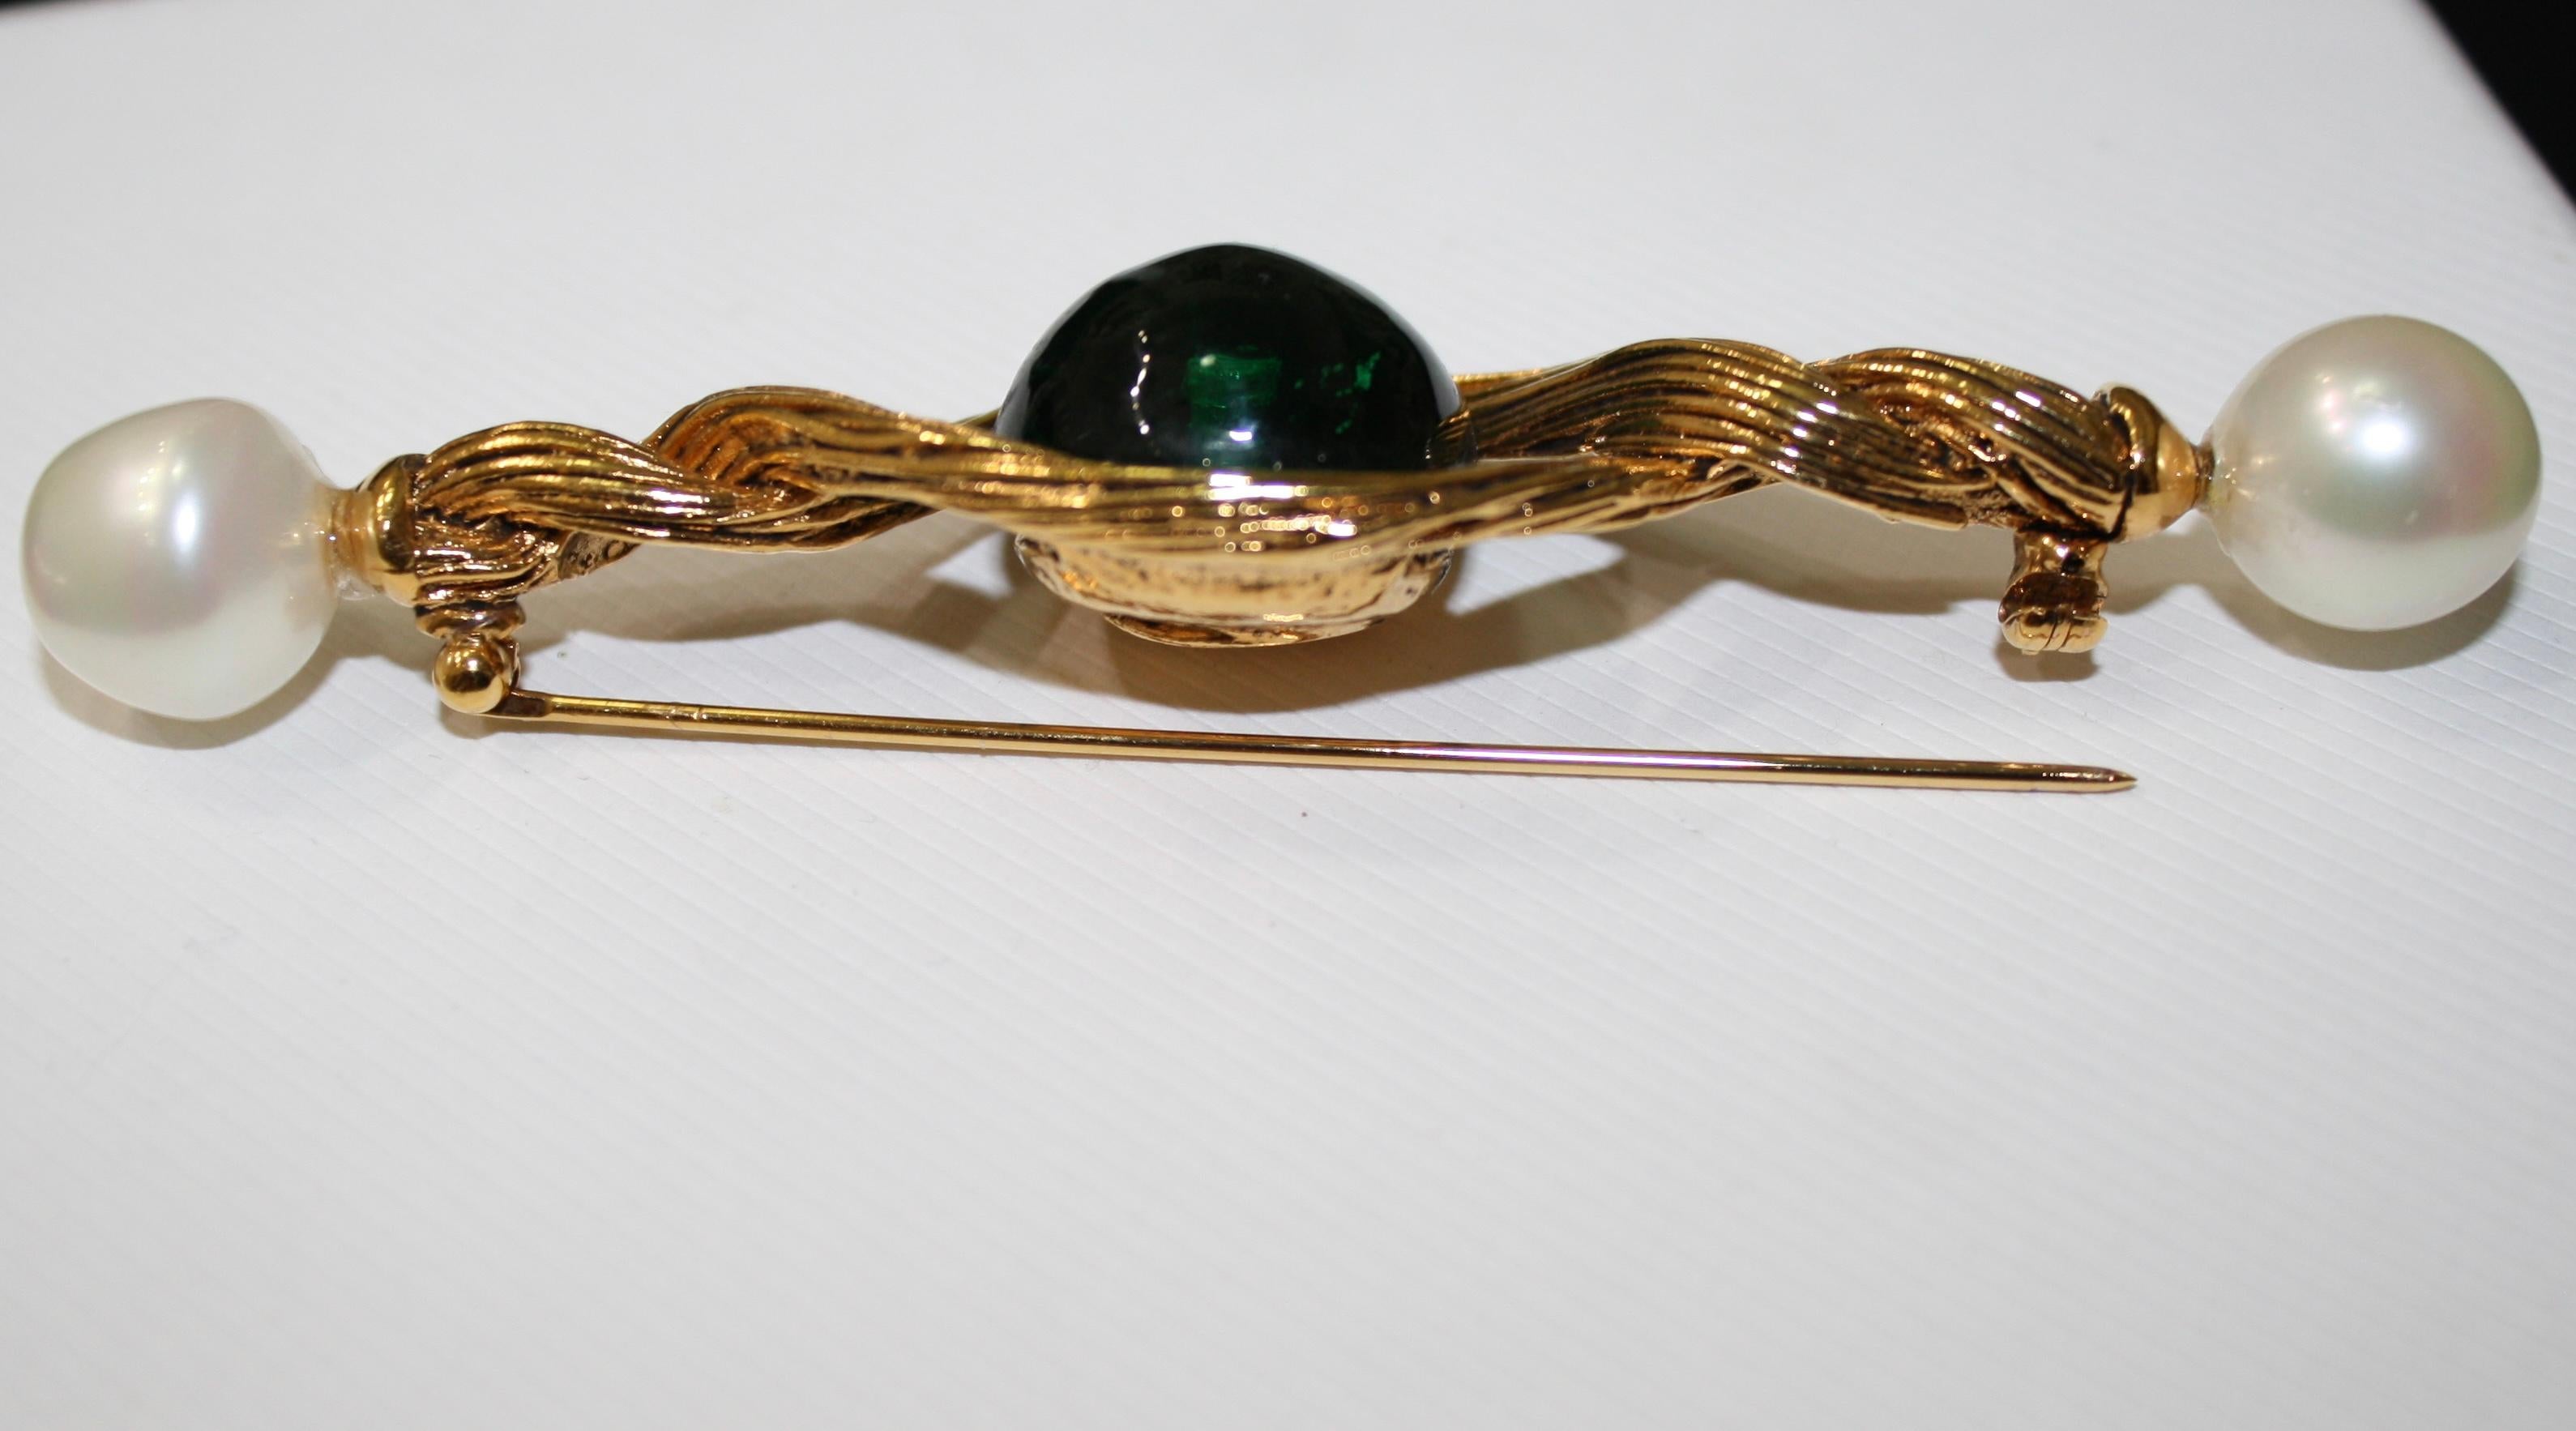 Authentic Chanel brooch in green pate de verre , gilded brass. Handmade glass pearls.
From the Fall 1994 collection. Slight defect on right pearl on the back , not visible when worn
A collector’s item